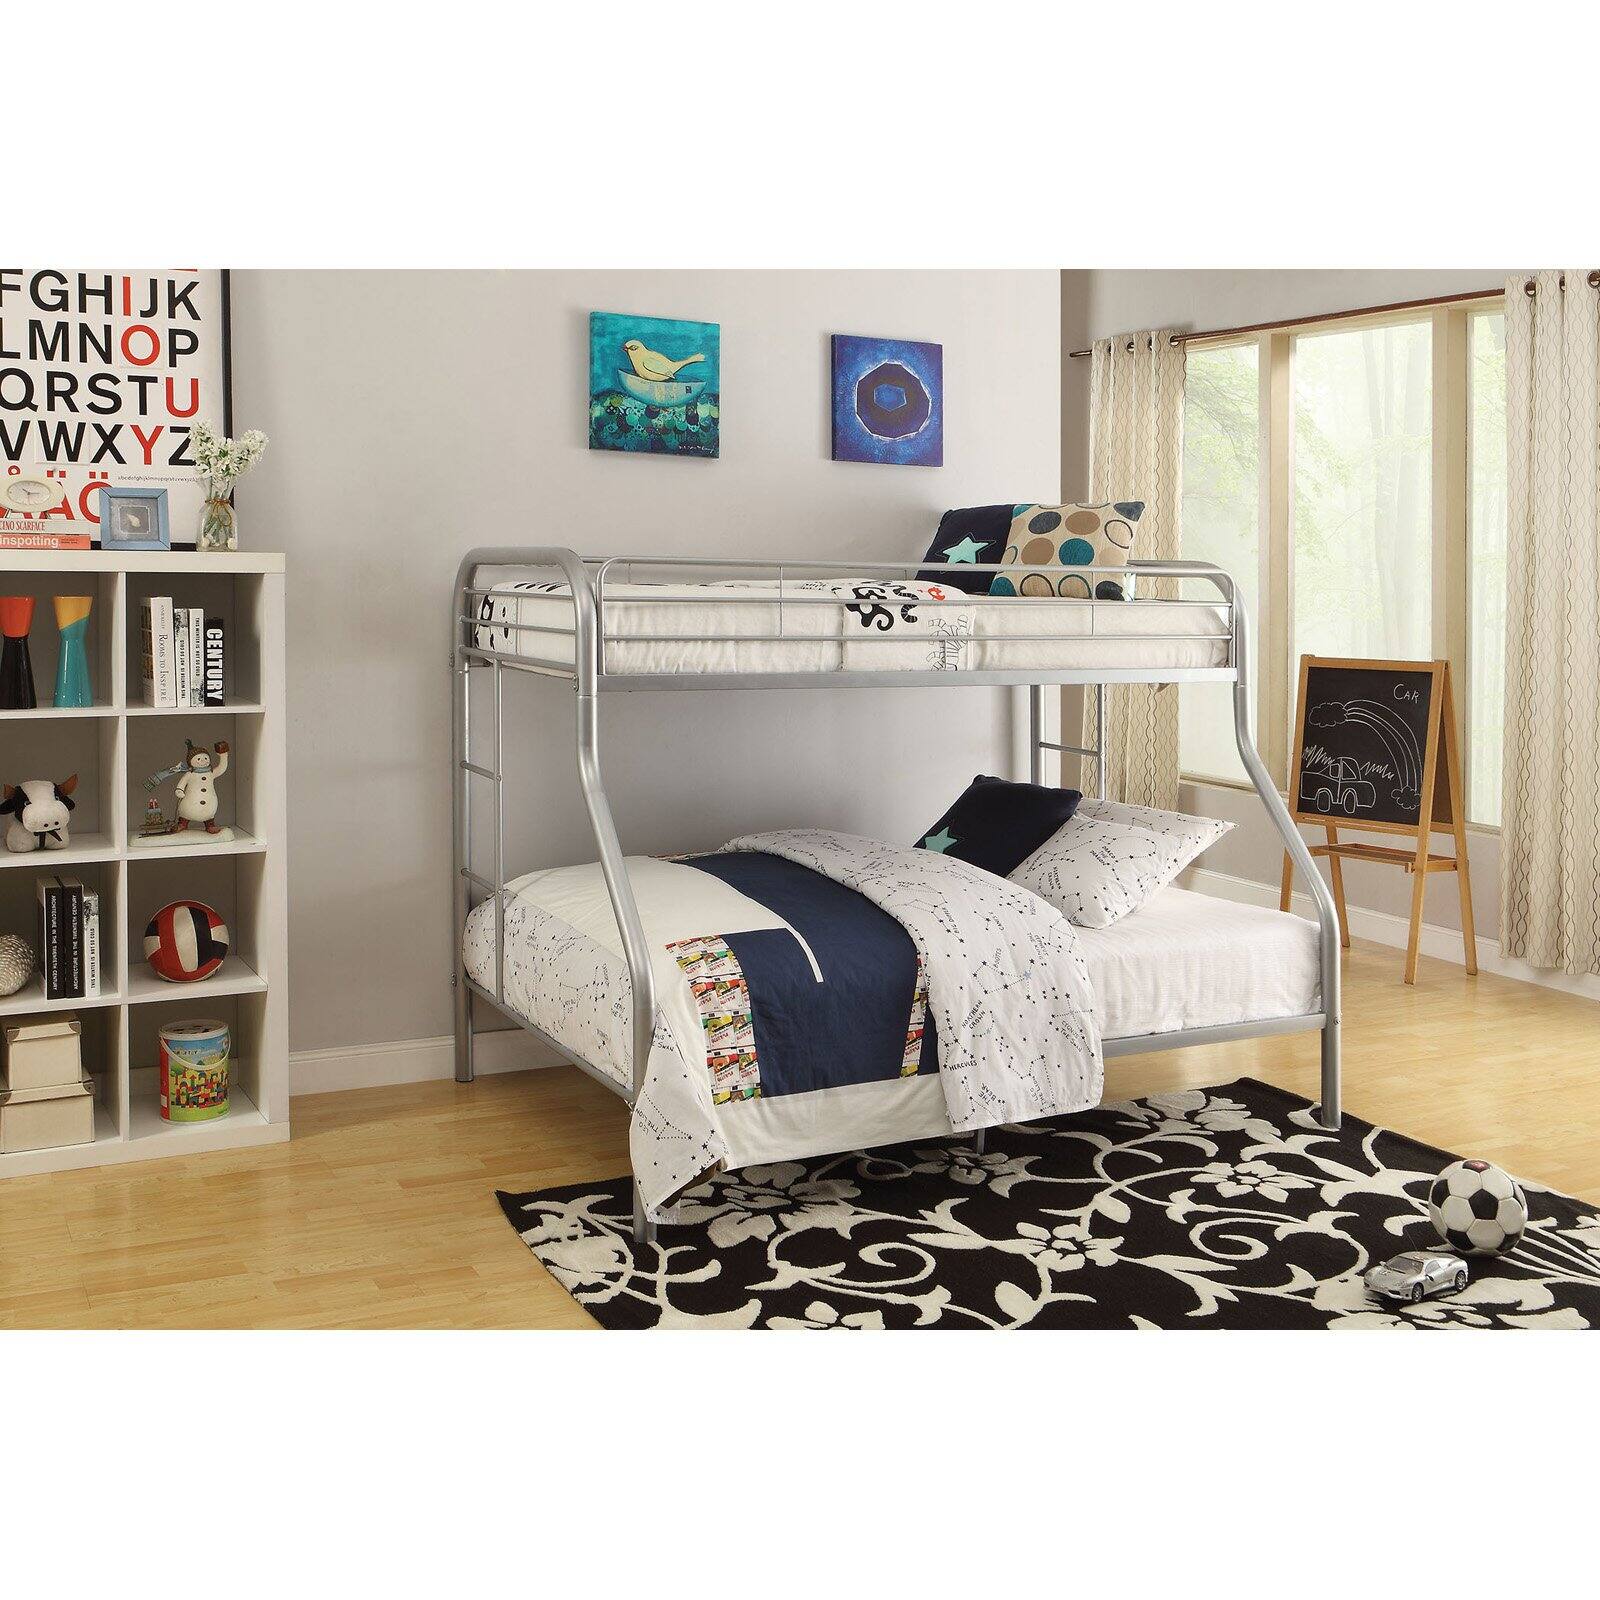 ACME Furniture Tritan Twin XL over Queen Bunk Bed in Silver - image 2 of 2